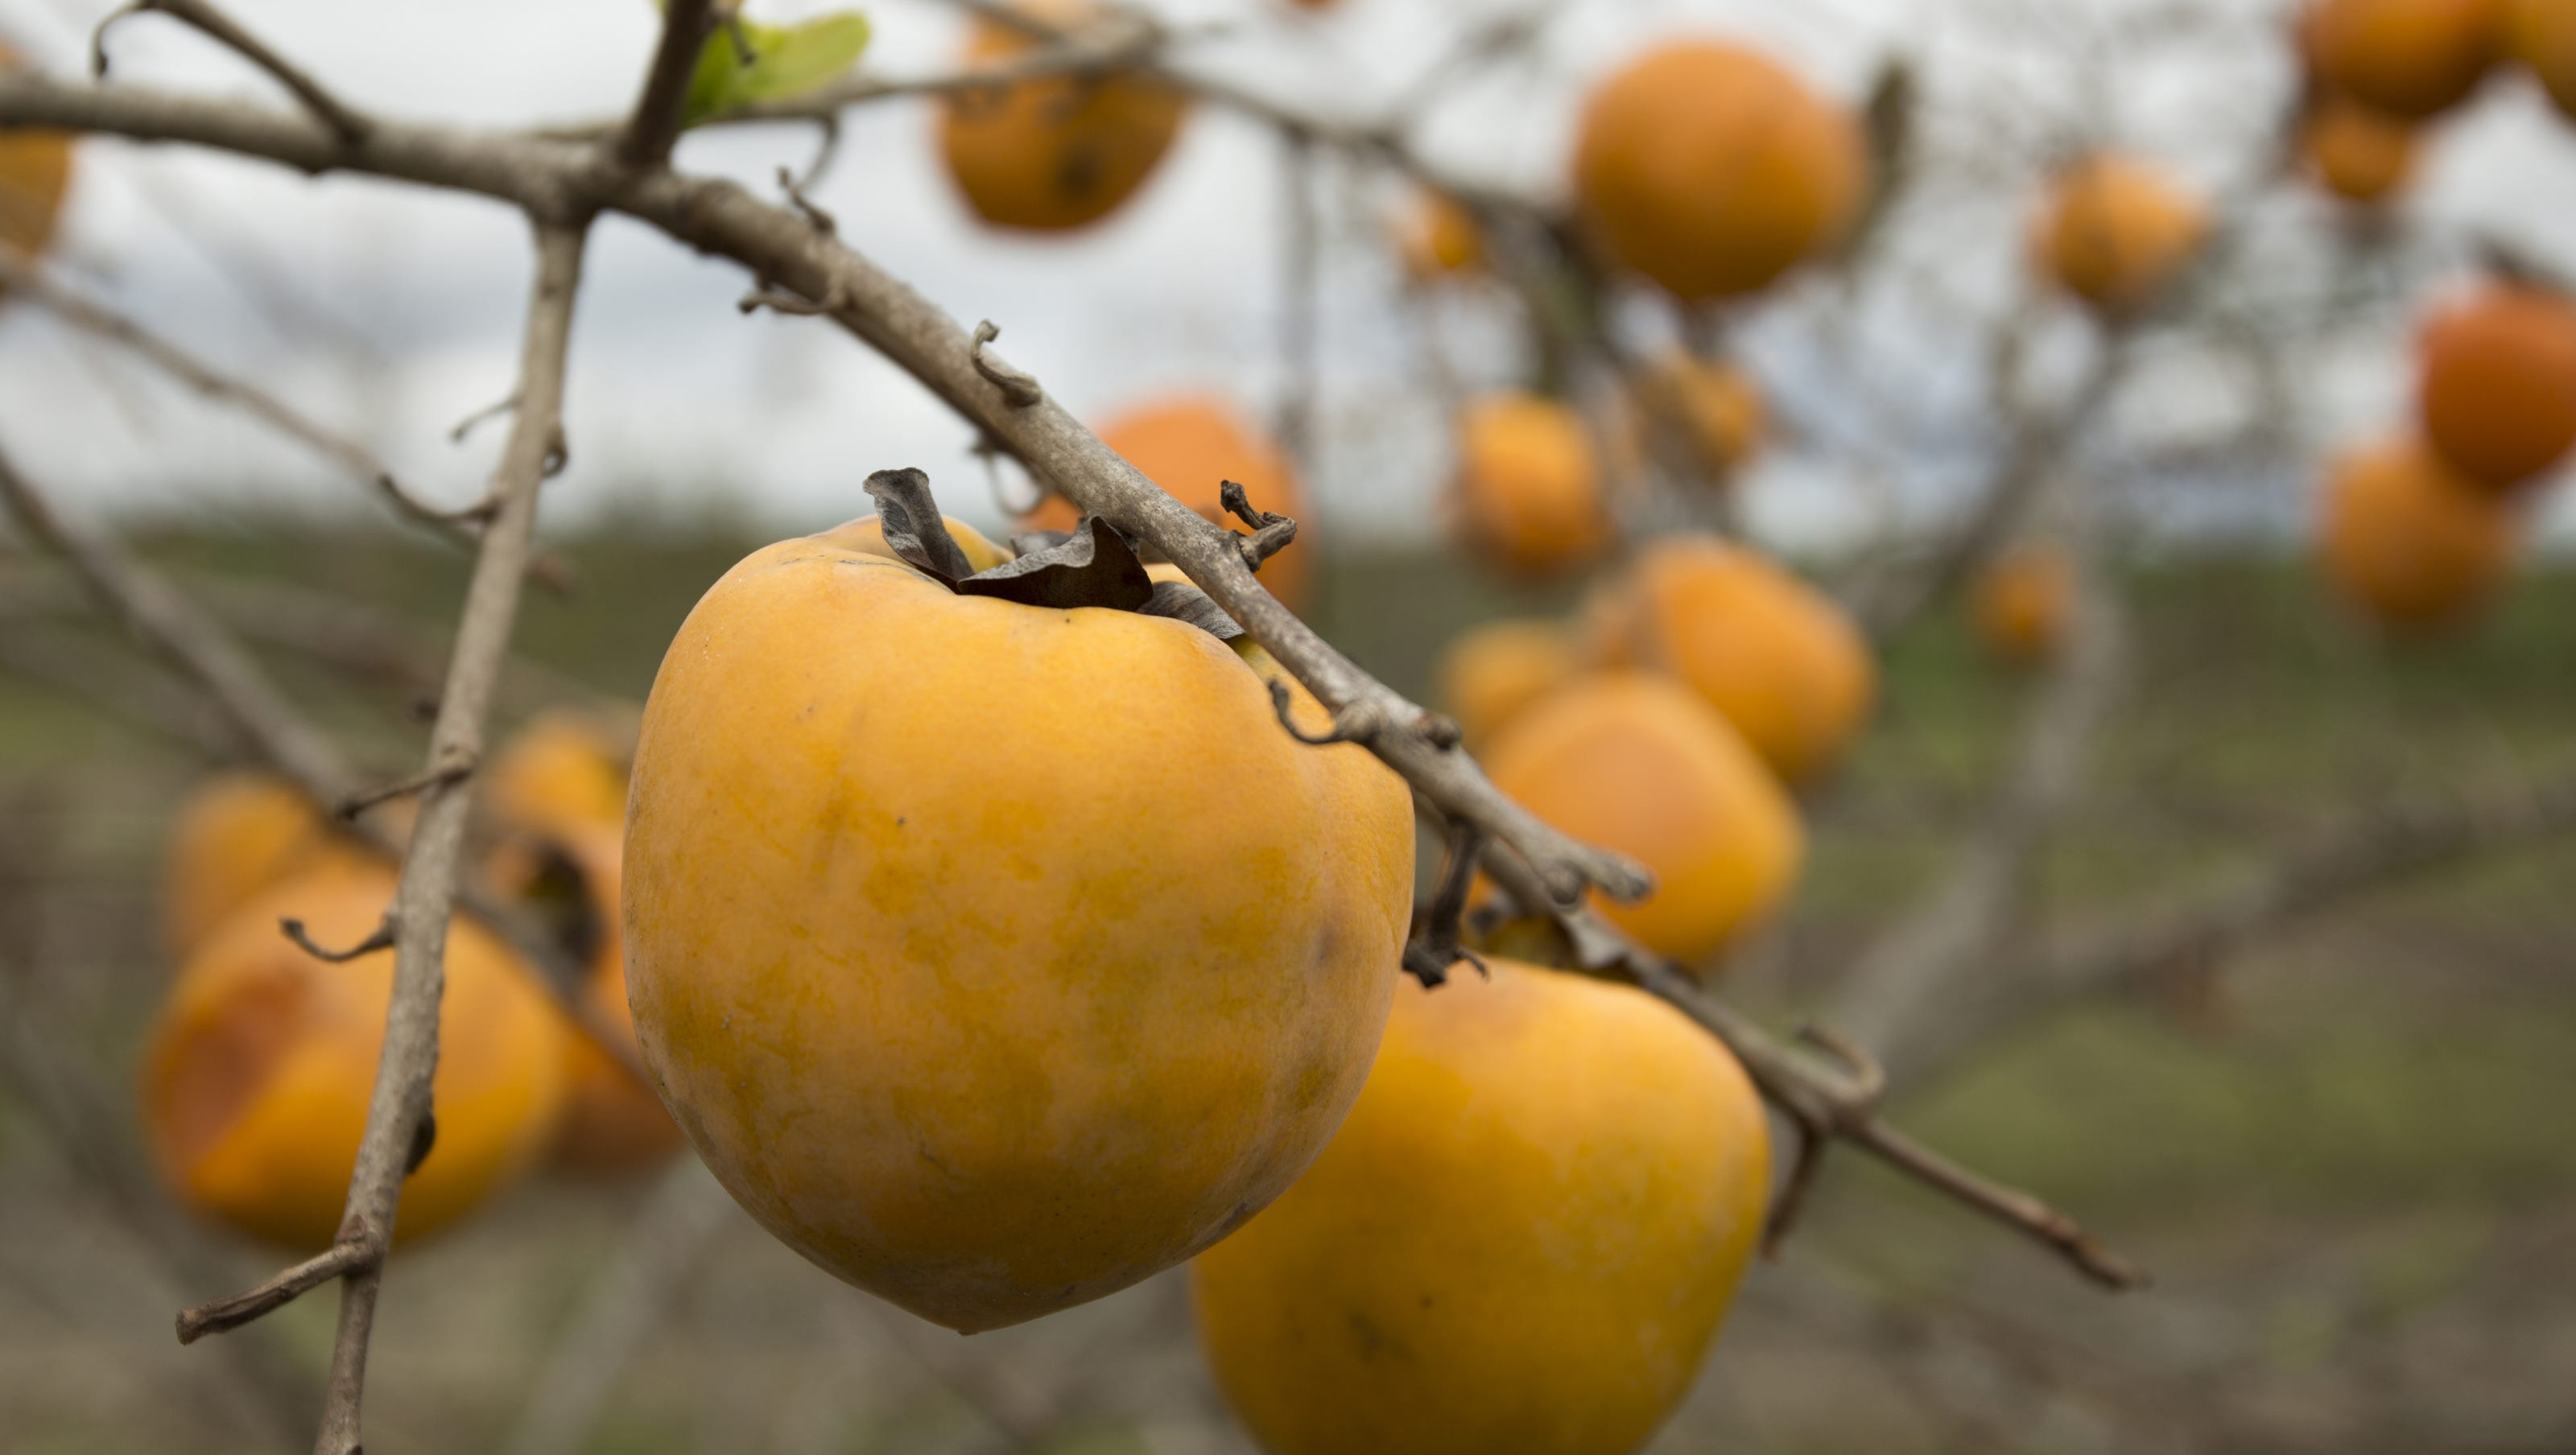 Pictures Of Persimmons